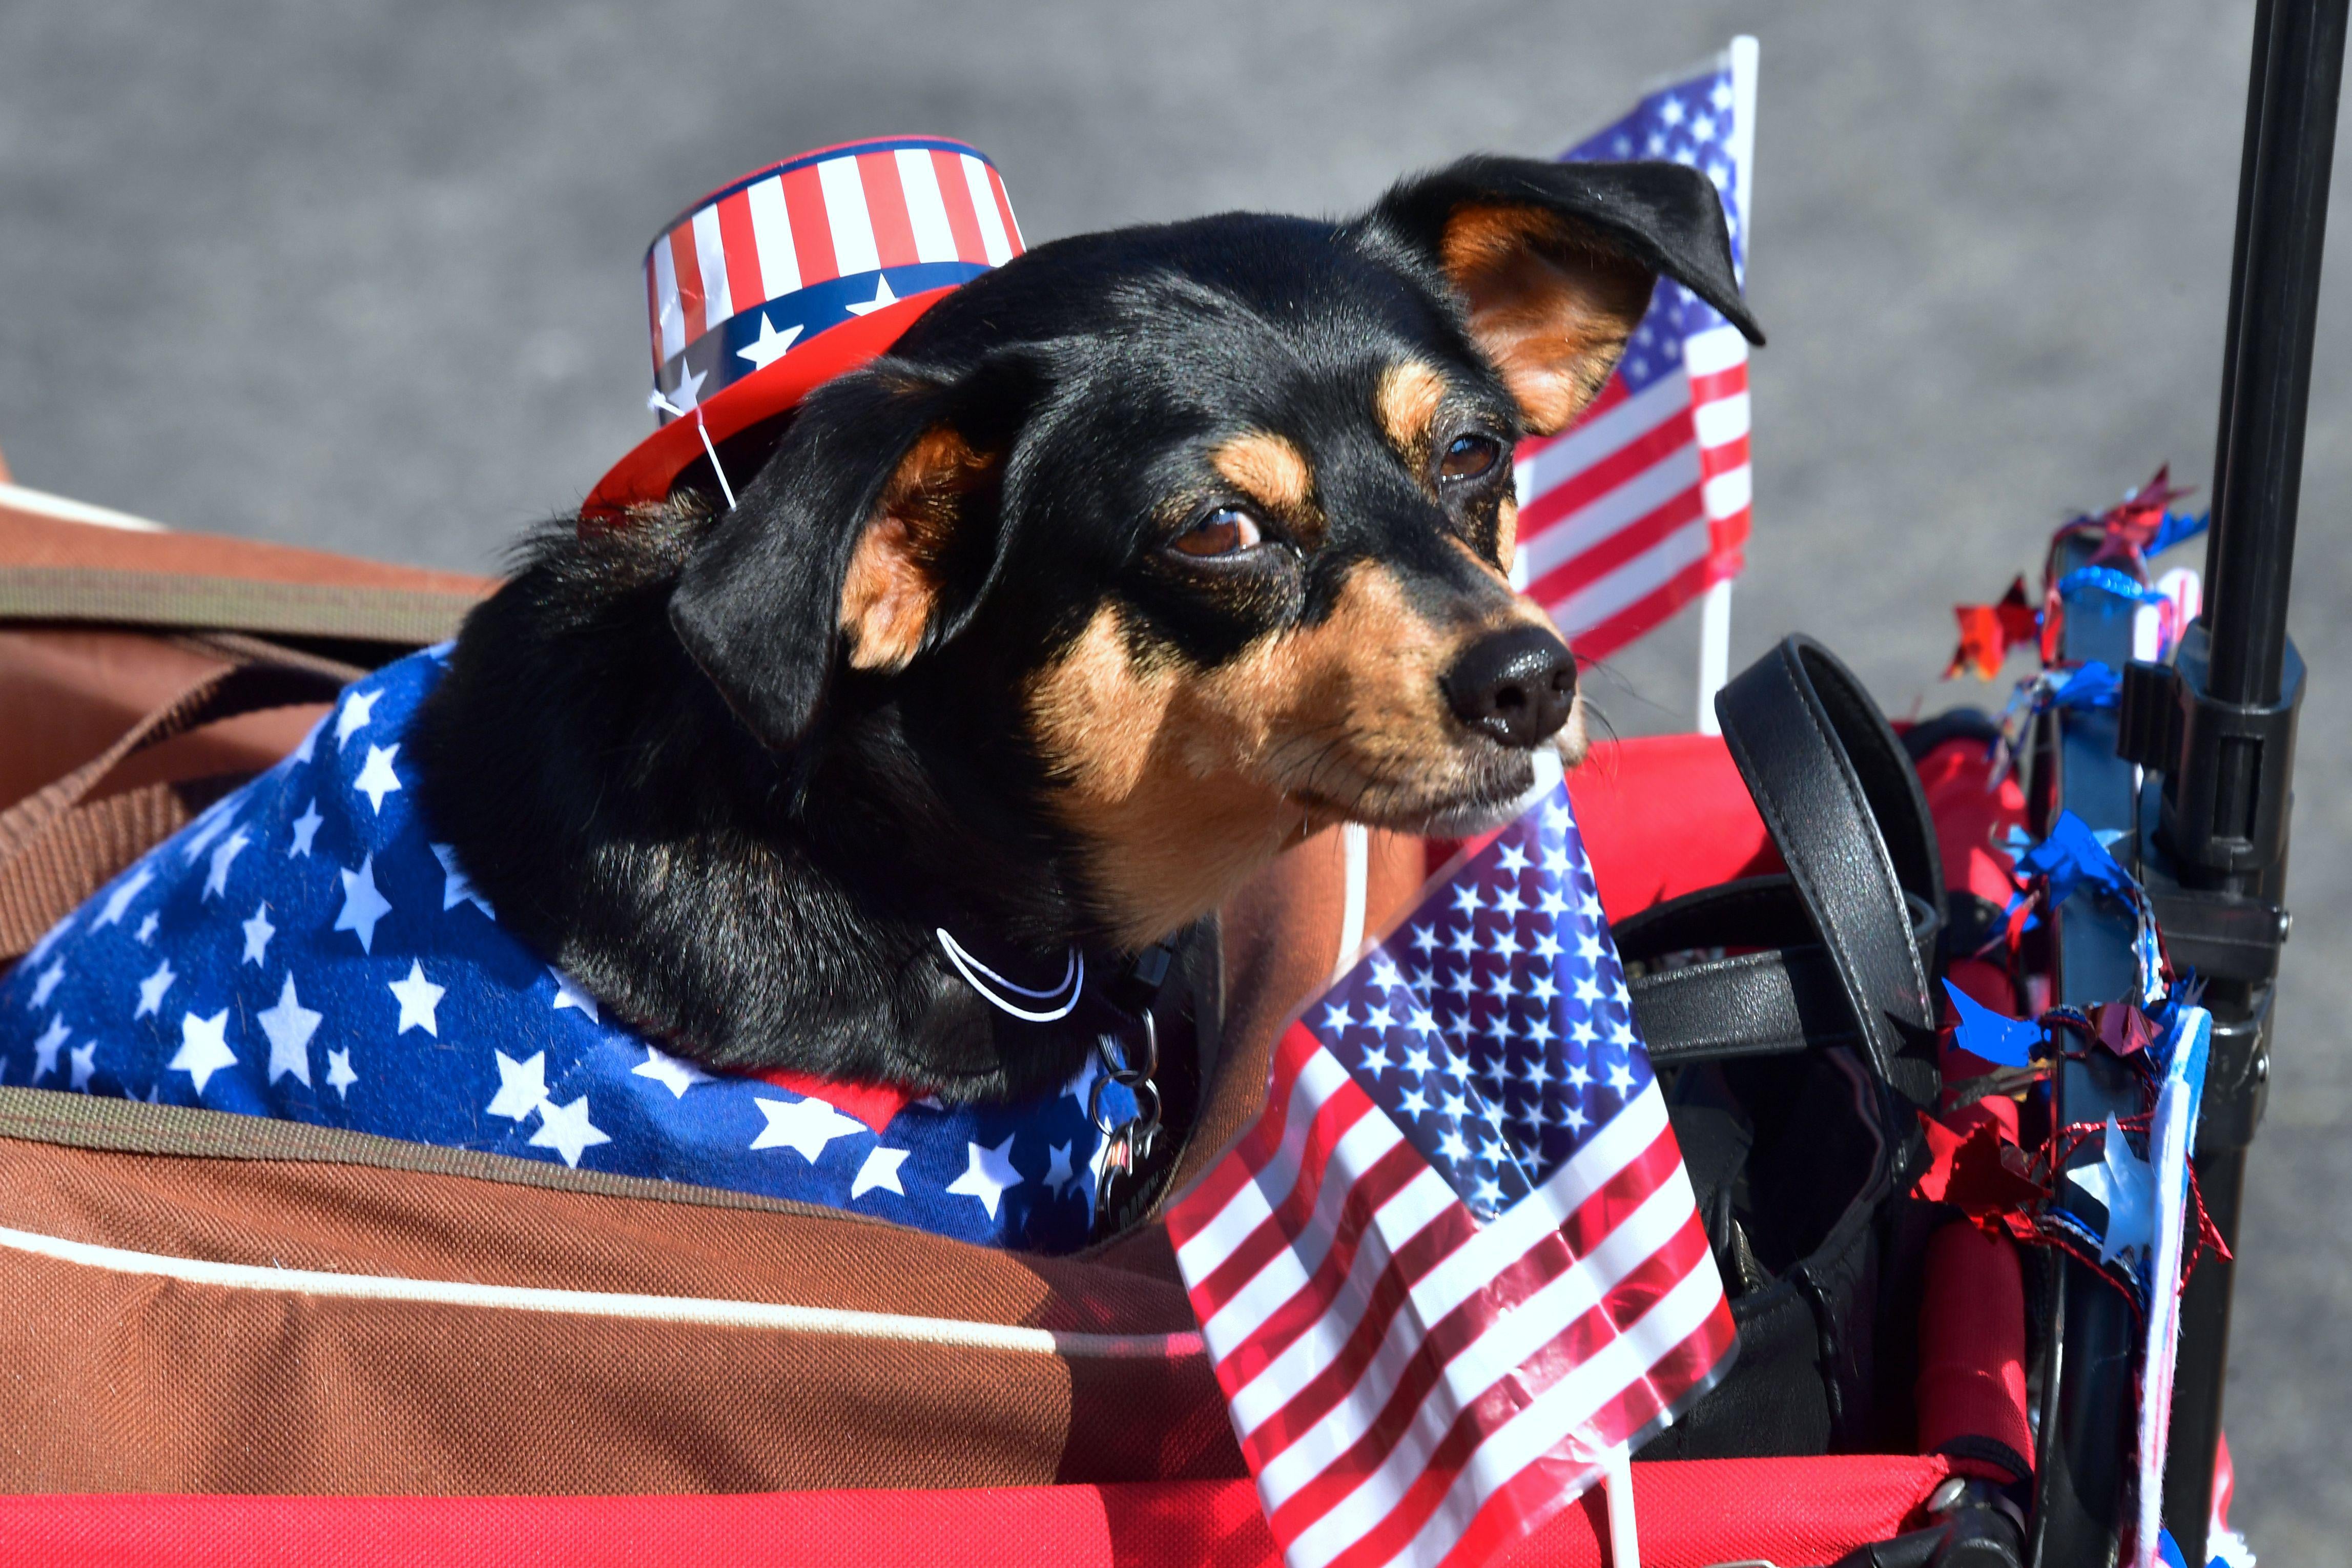 A Dachshund Terrier, wrapped in American flags for a parade.